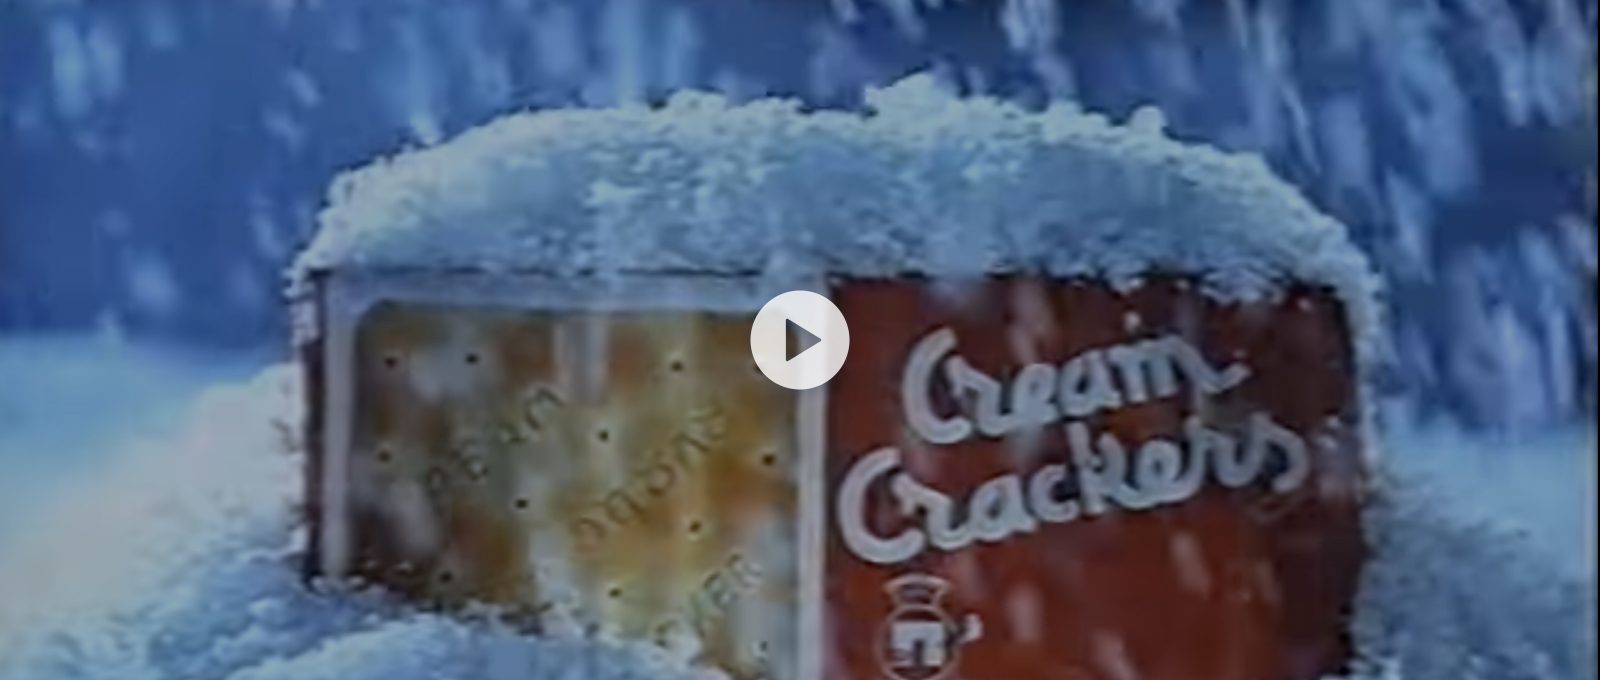 Cream Crackers commercial from the 1990s; “They’re a cracker”